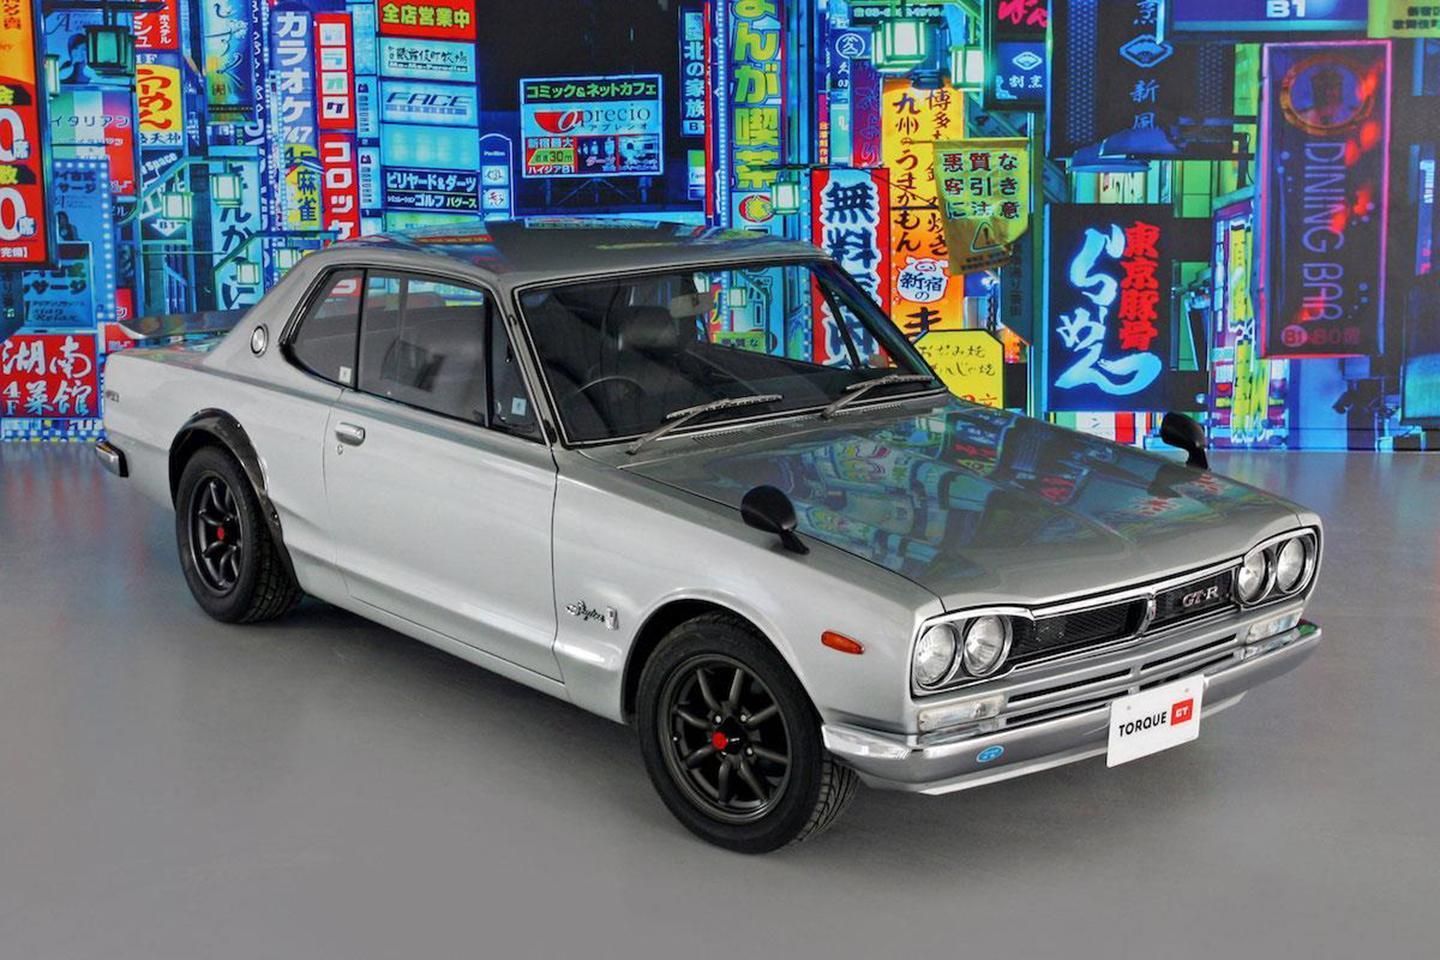 The R34 Nissan Skyline GT-R Marks the End of the JDM Import Golden Age